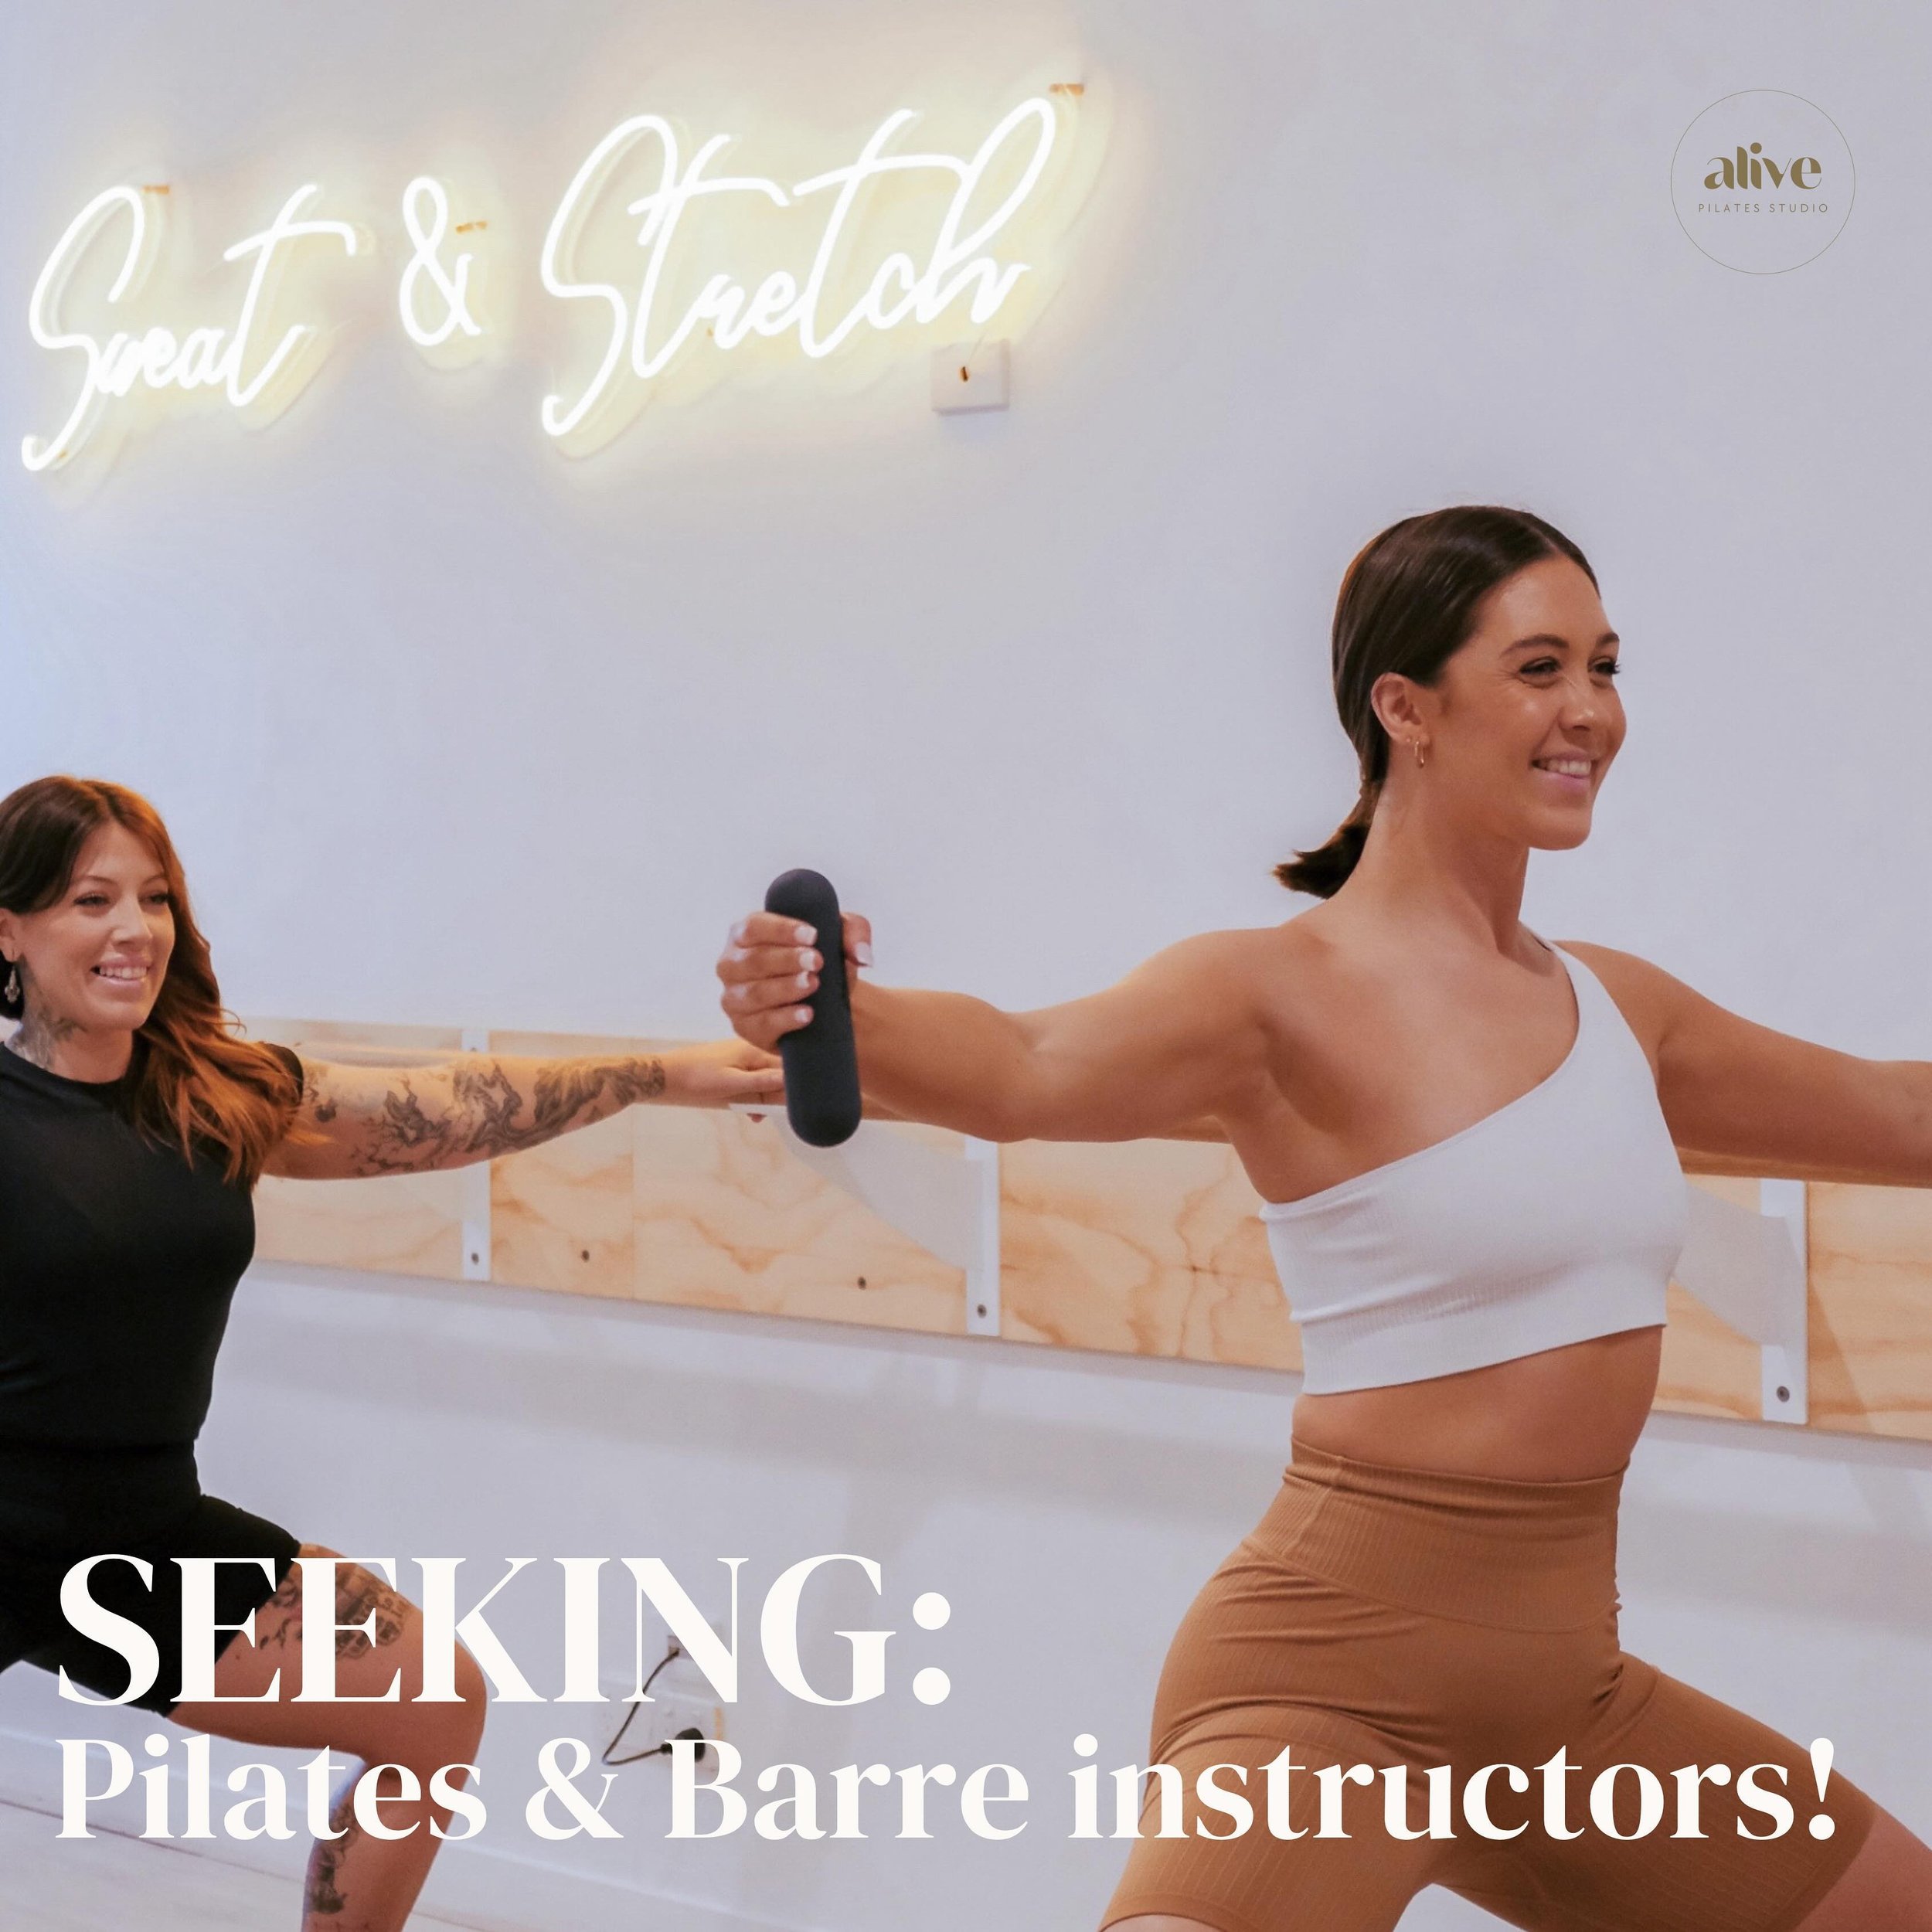 &mdash; SEEKING: Instructors who can teach both Pilates &amp; Barre and are looking for work! 

If you have;
- 6-month minimum teaching experience 
- A minimum Certificate IV in Pilates Reformer &amp; Matwork
- Experience/certification in teaching Ba